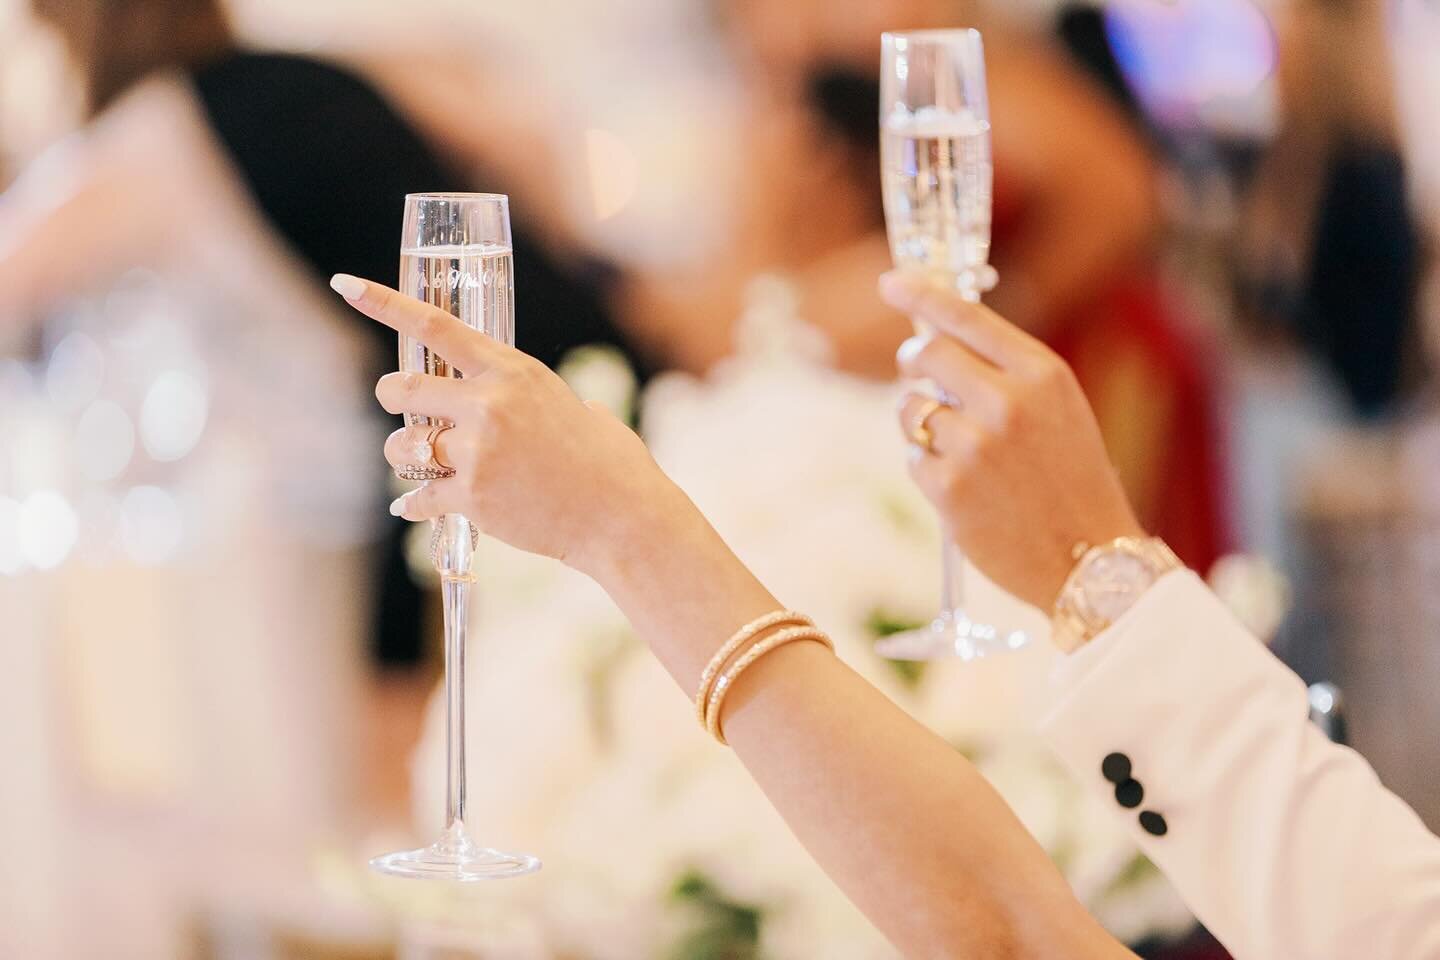 Let's raise a glass and cheers to being ready to have a great week 🥂✨ #itsanewday 

📷: @lovelyvalentine